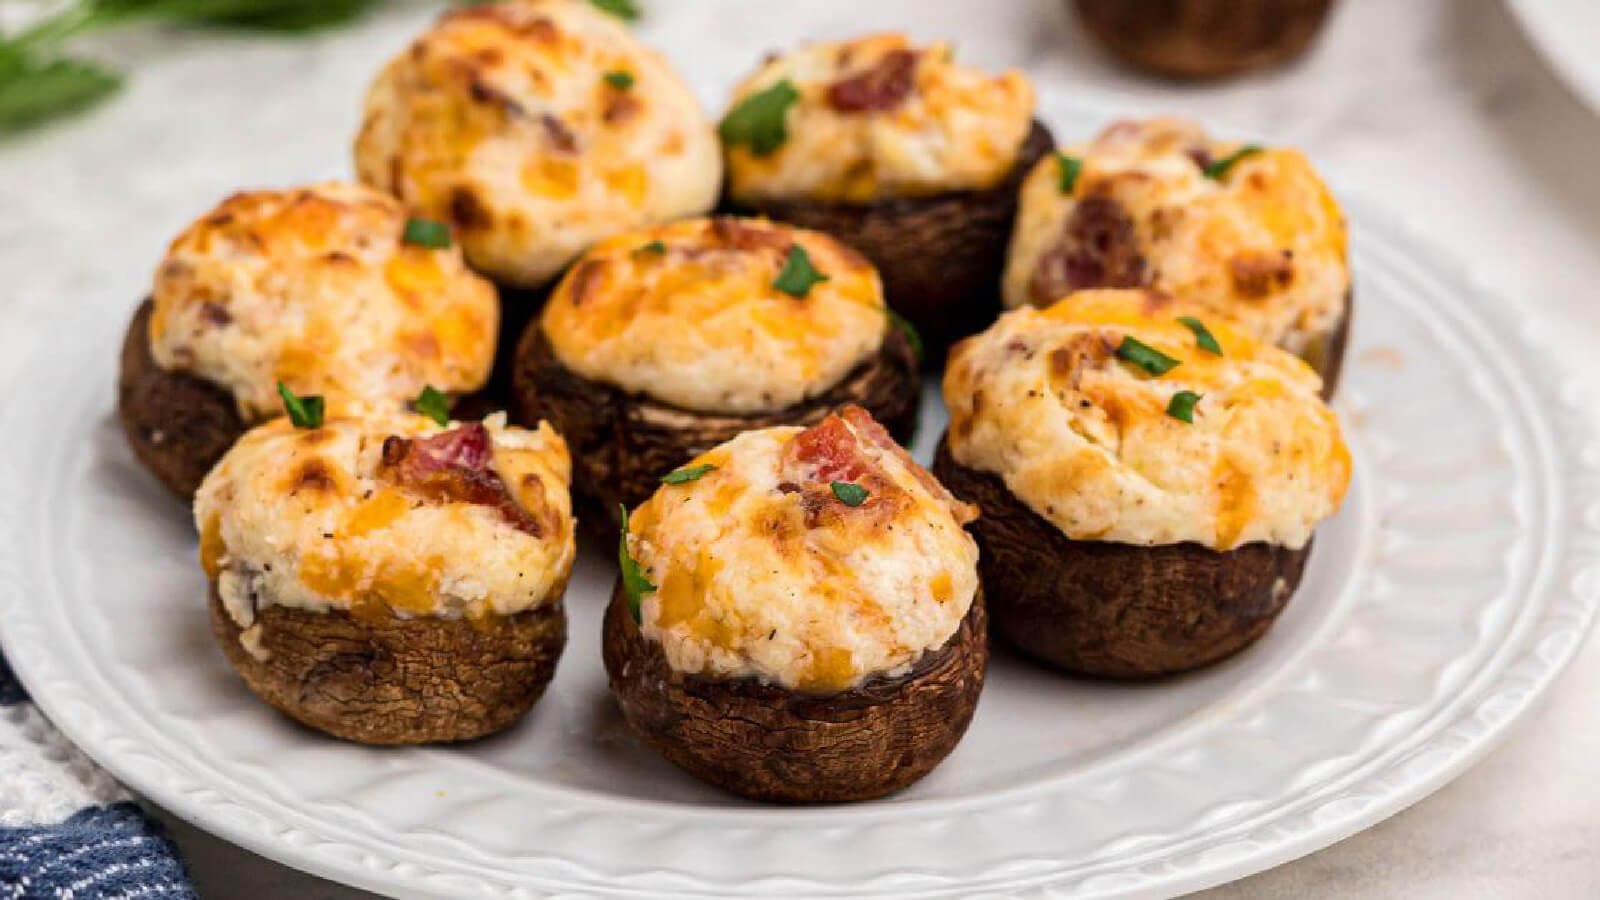 stuffed mushrooms made in the air fryer and placed on a white plate, ready to serve.